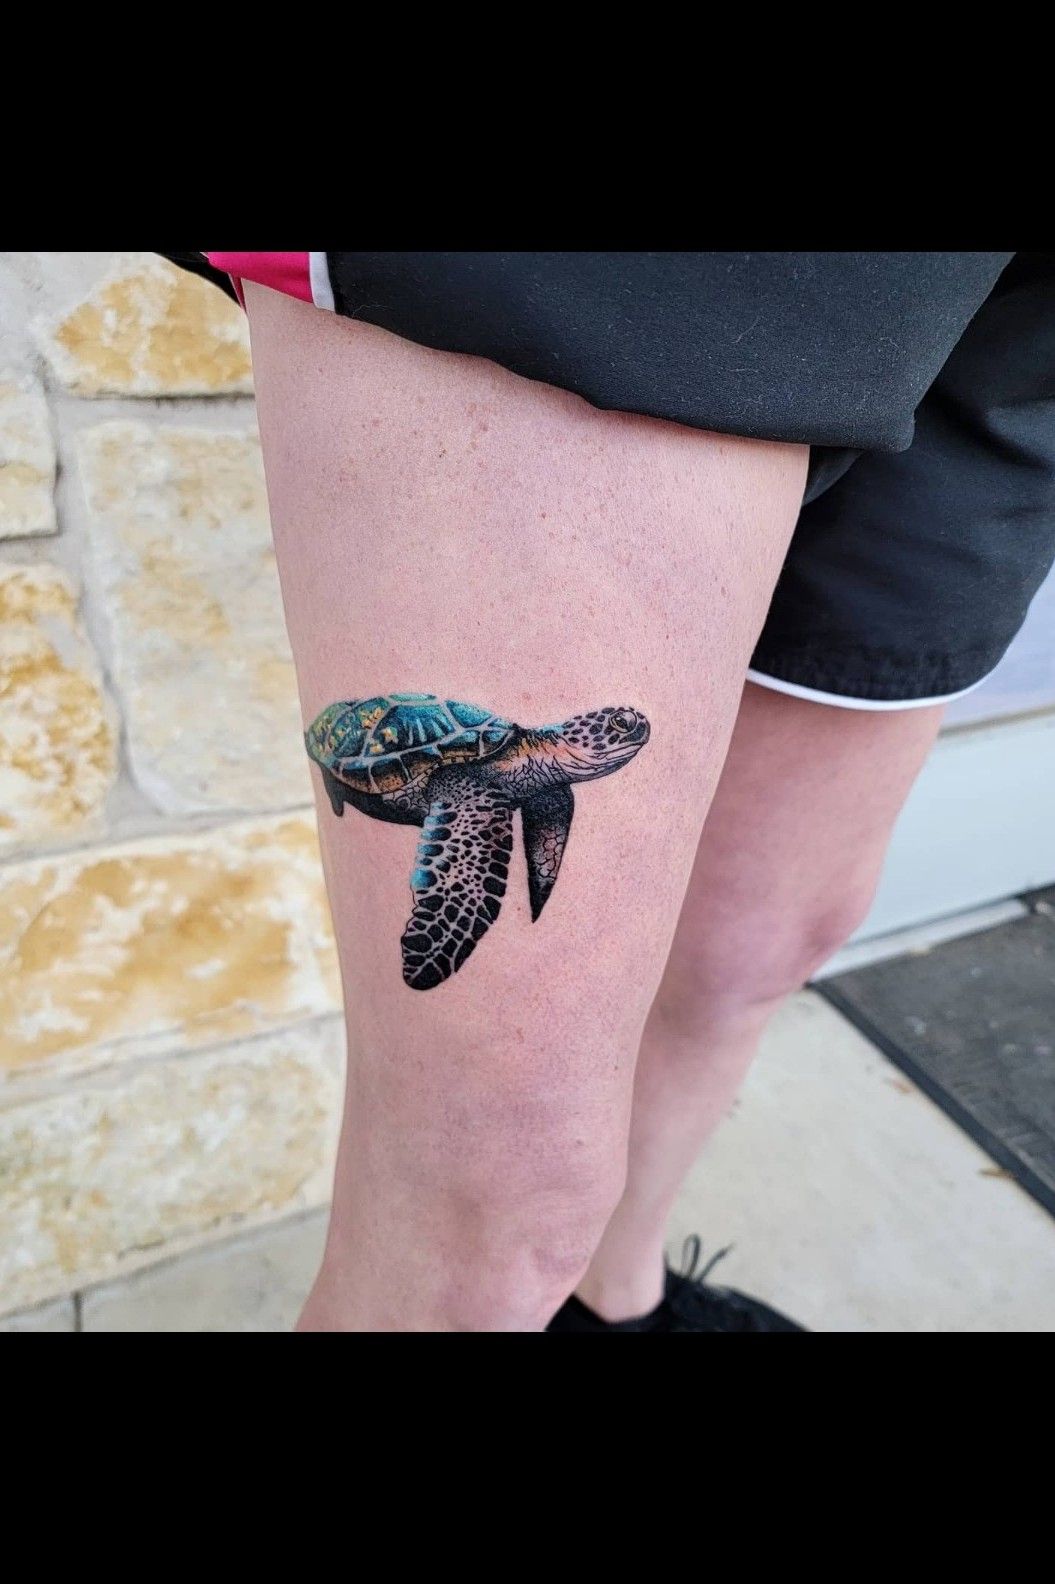 Top 81 Best Small Turtle Tattoo Ideas  2021 Inspiration Guide